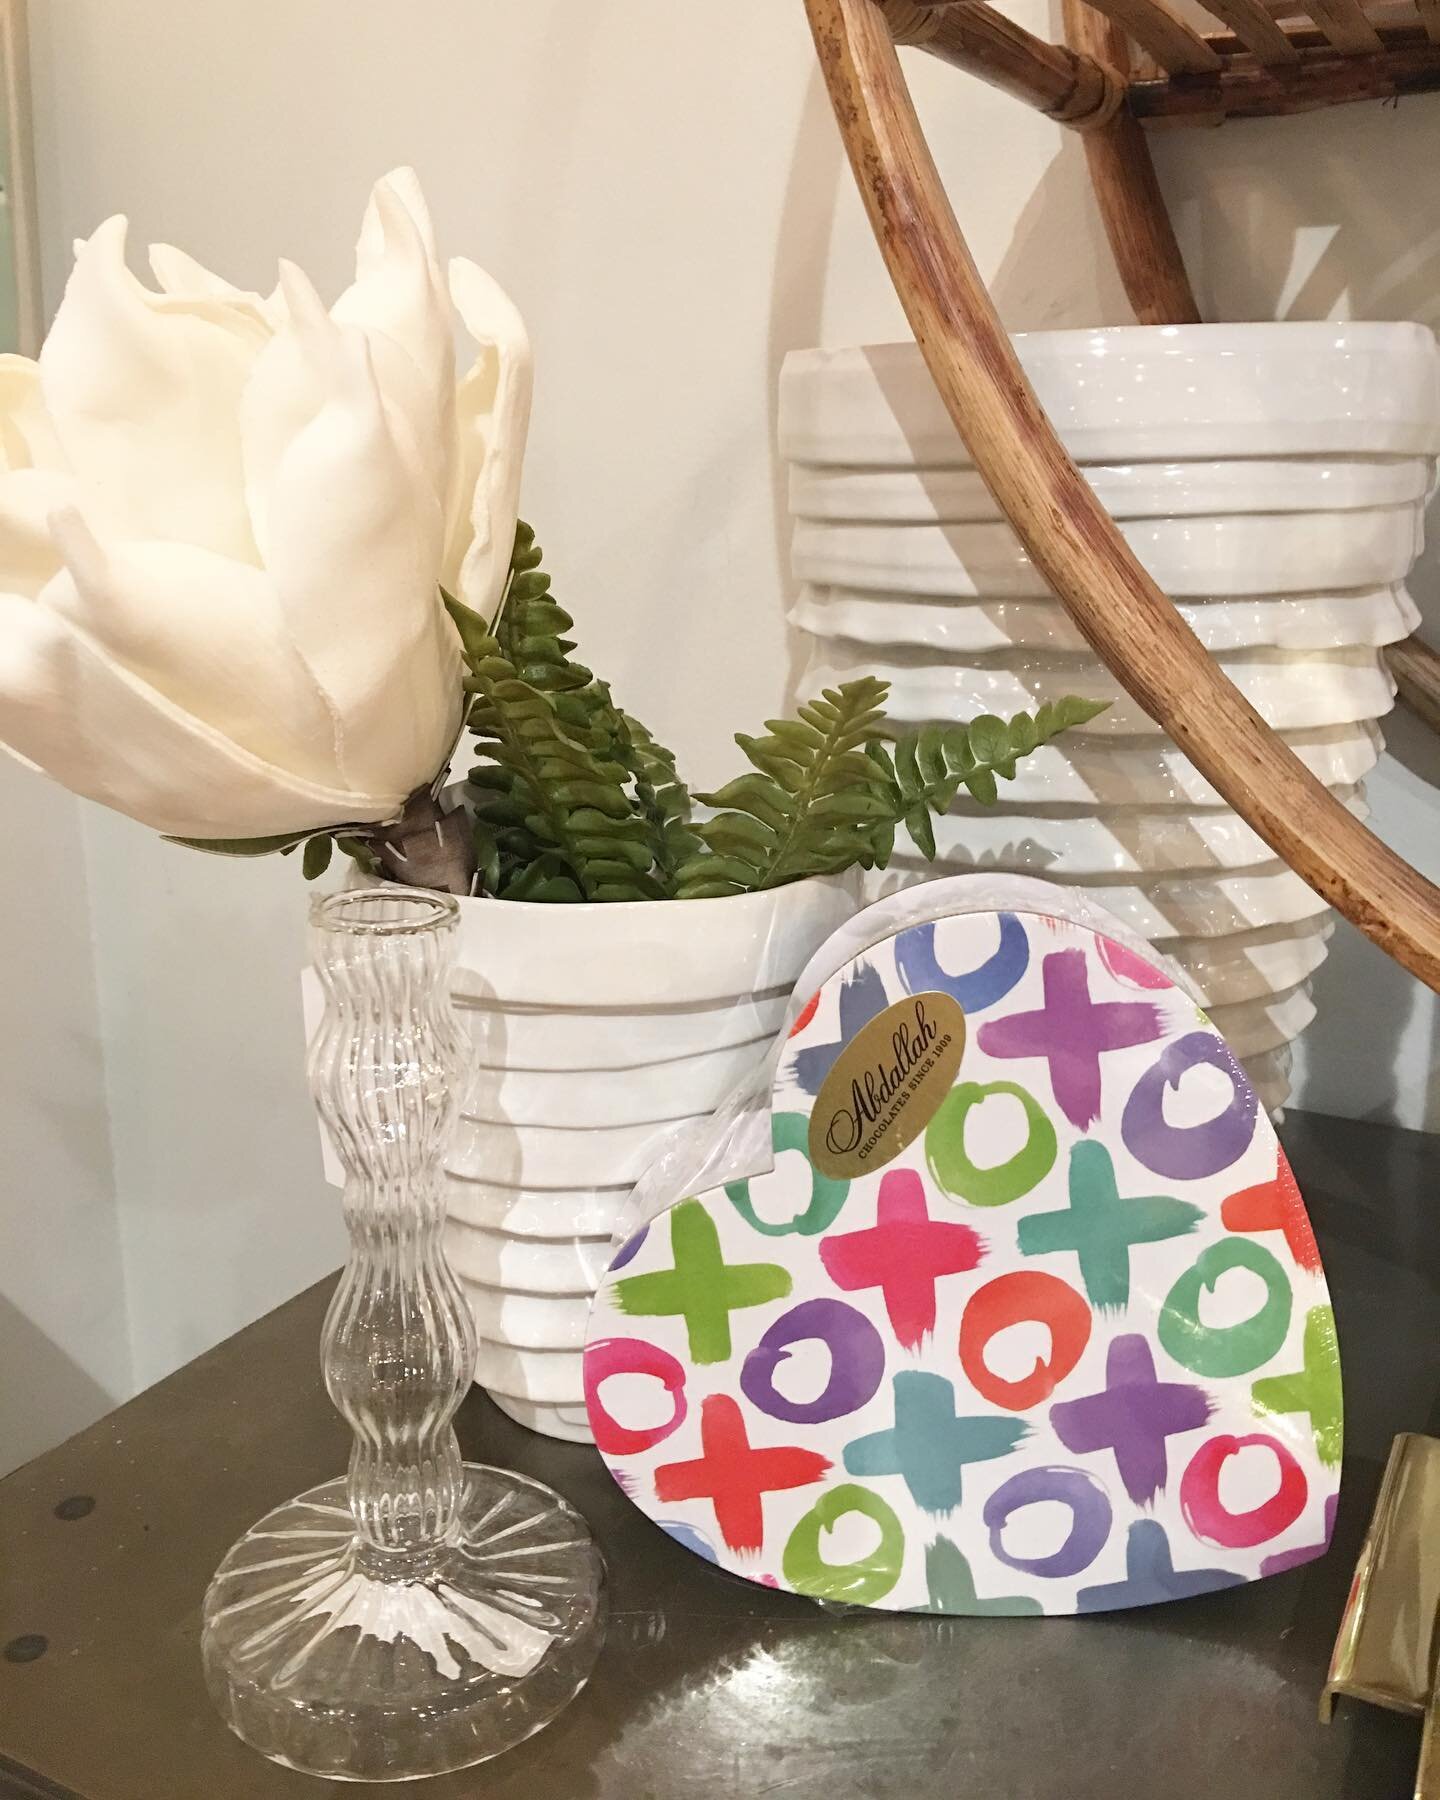 Our favorite vases for elevating your floral bouquets 💐 XOXO 💕 
.
#rva #shoprva #shopsmall #rvaexperience #smallbusiness #style #stylepost @shopsat5807